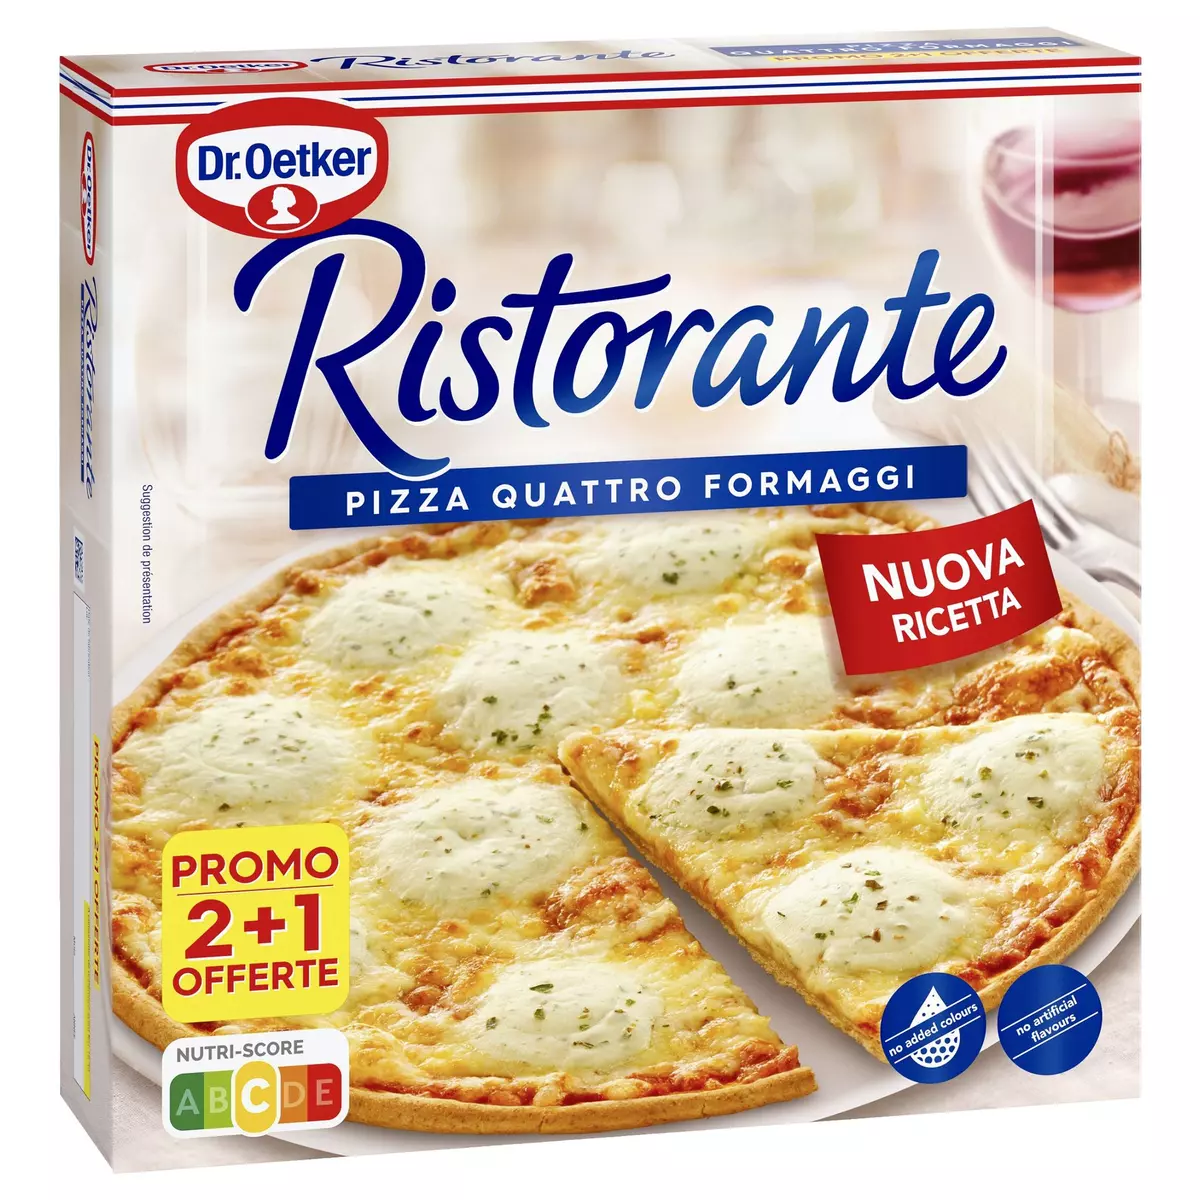 DR OETKER Ristorante pizza 4 fromages 2+1 offerte 3x340g